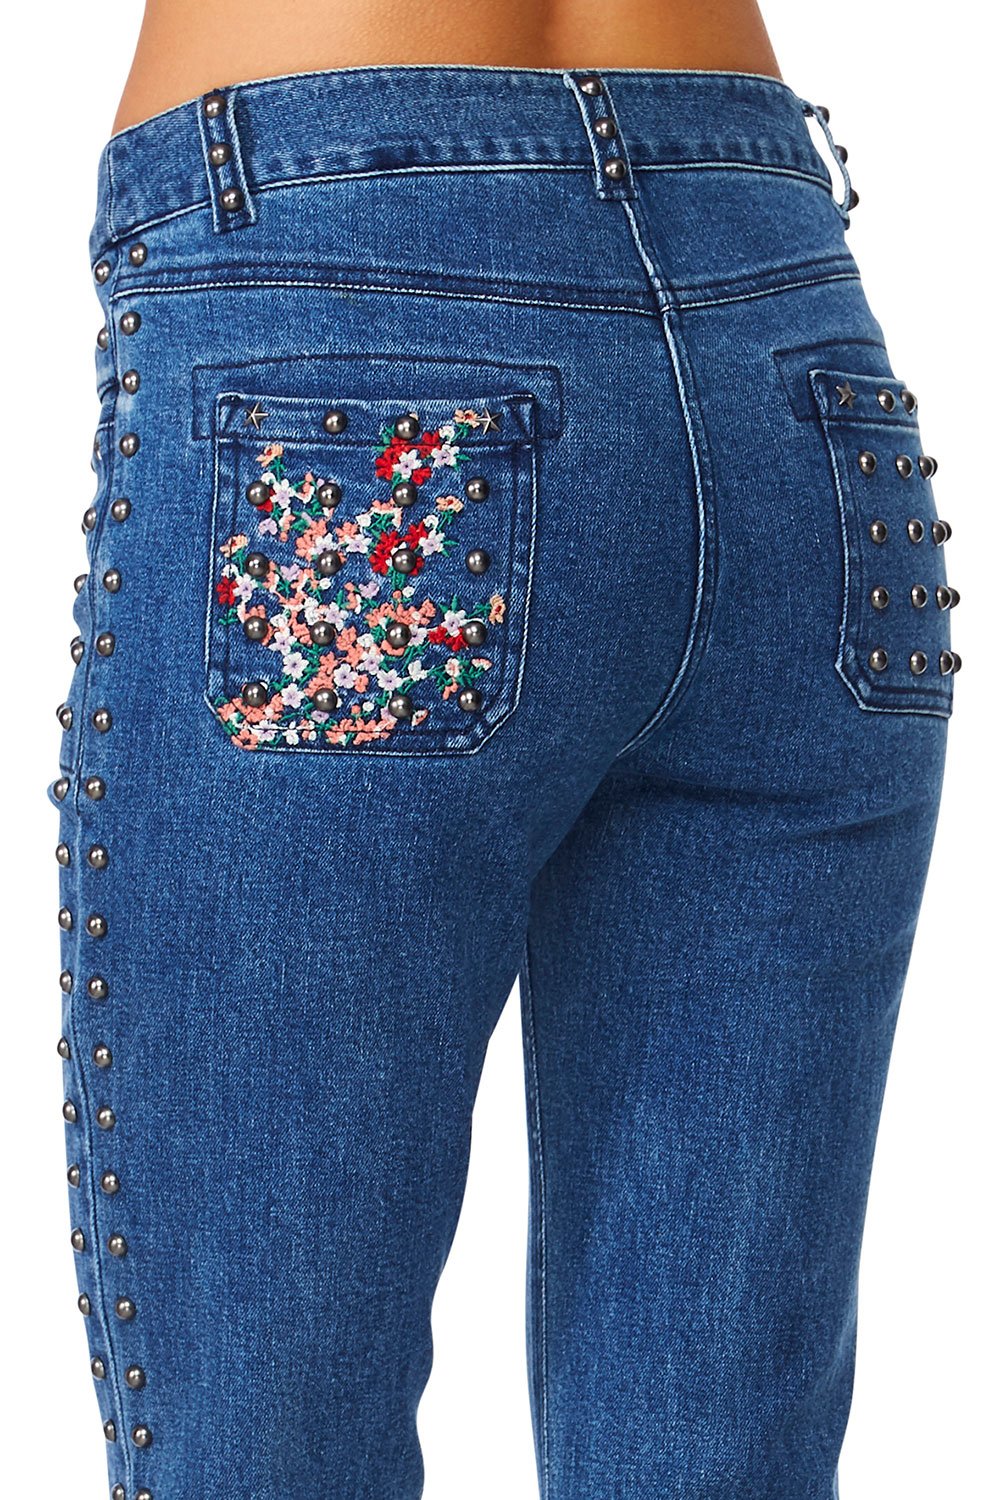 CAMILLA QUEEN OF KINGS FLARED JEAN W CONTRAST PANELS